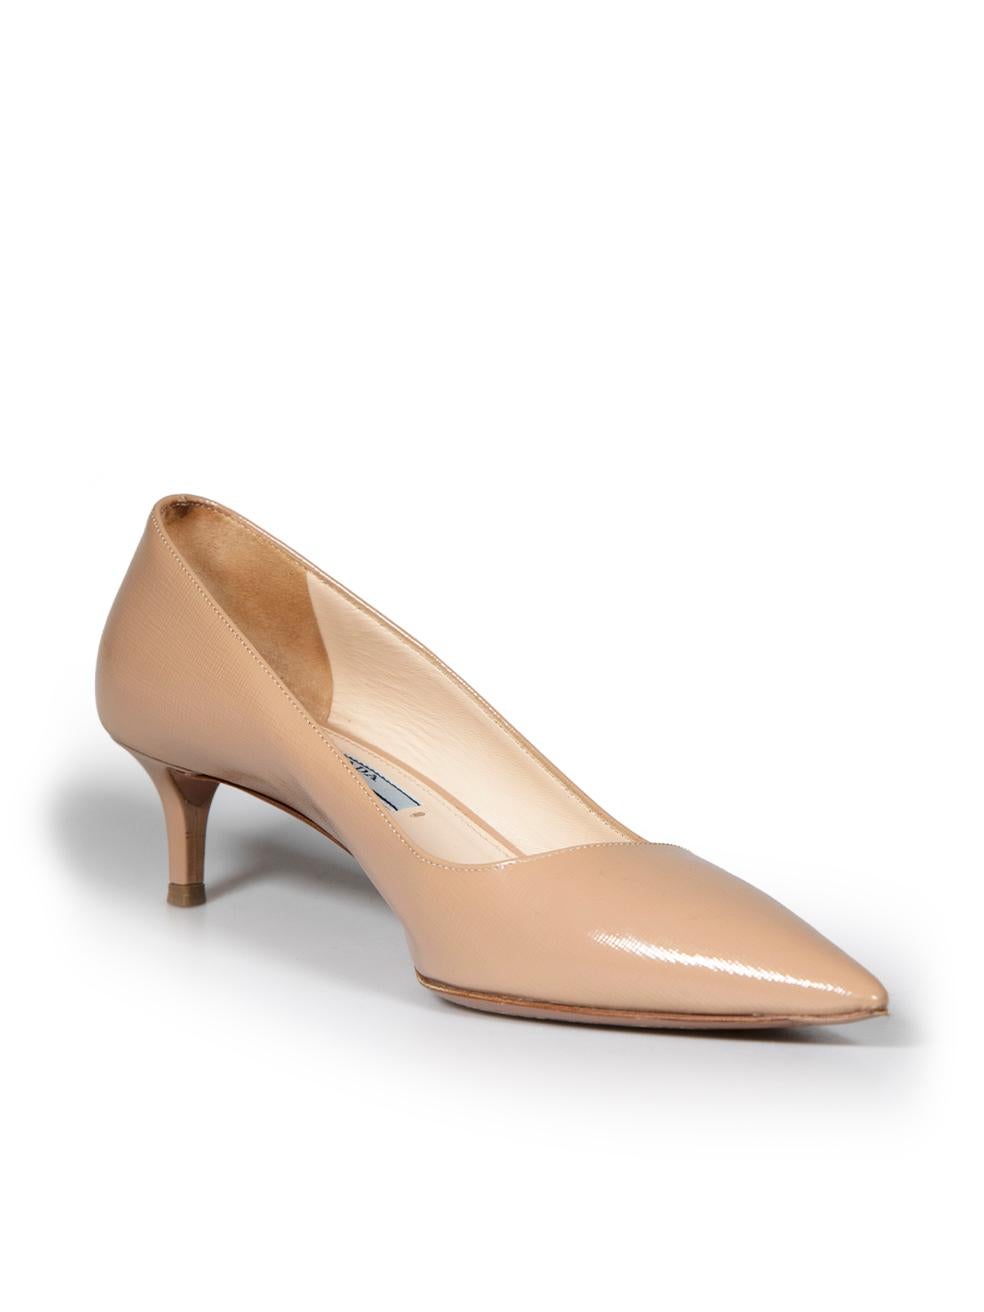 CONDITION is Very good. Minimal wear to pumps is evident. Minimal wear to soles and heel tips. There is and indent to the right shoe heel, and a small mark to the outer side on this used Prada designer resale item.
 
 
 
 Details
 
 
 Beige
 
